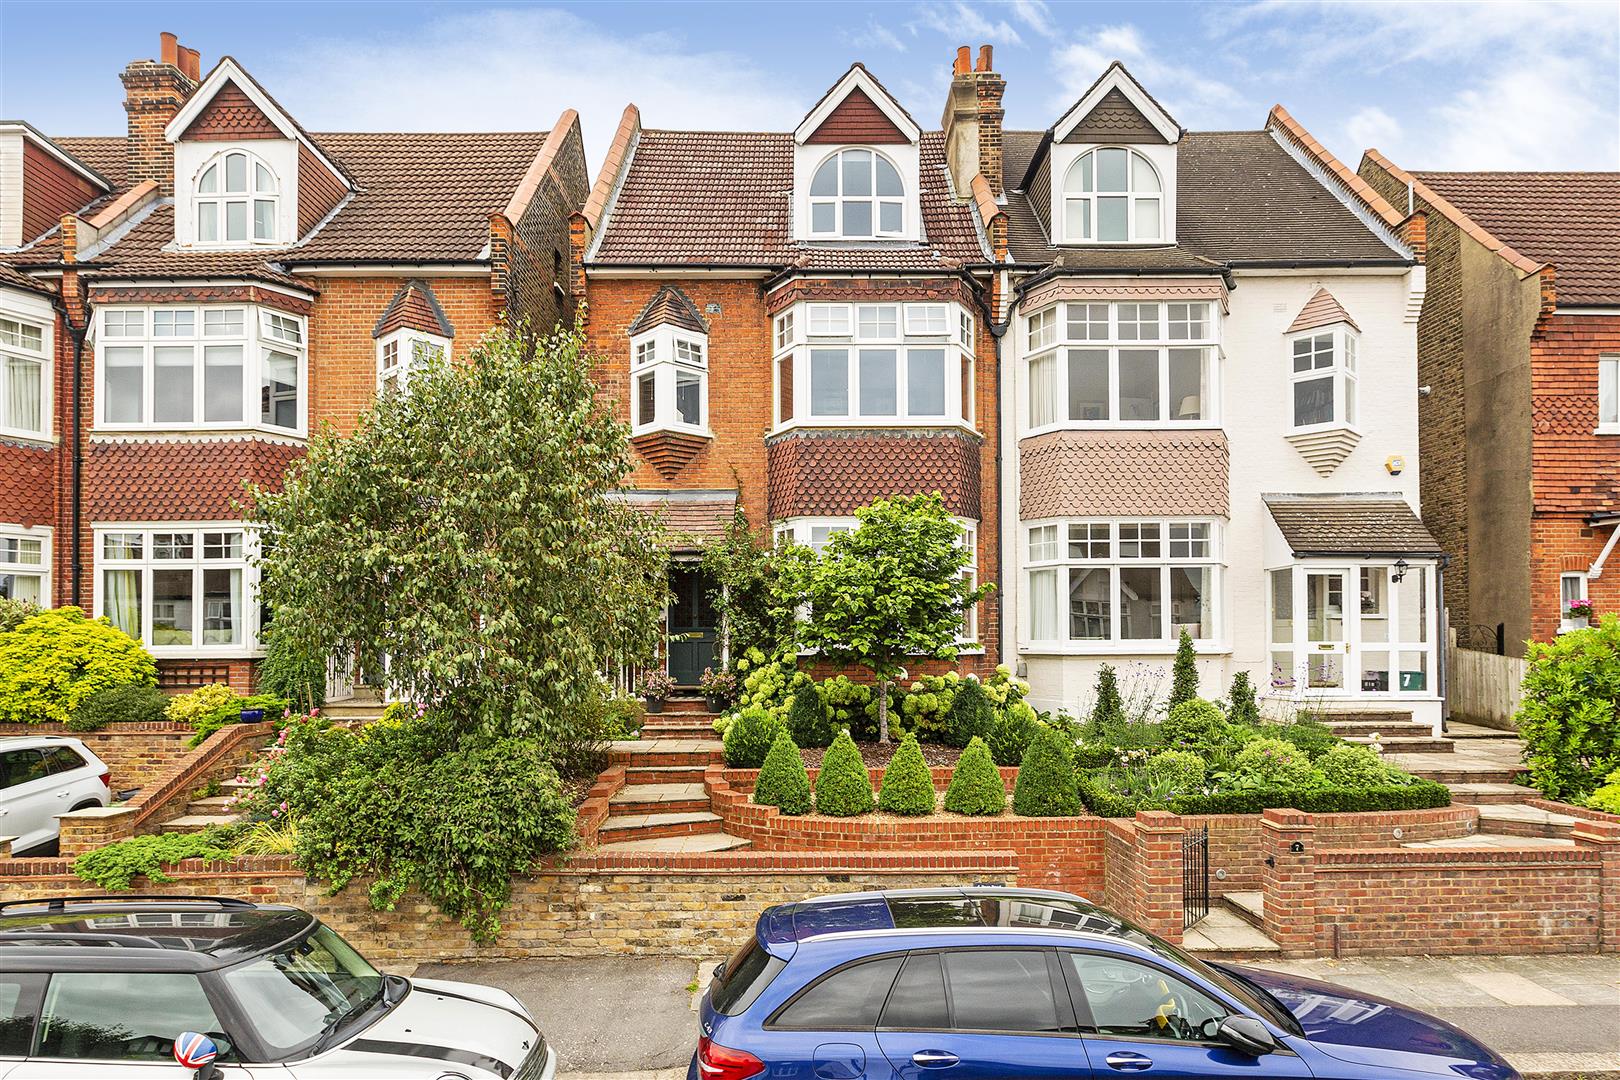 5 Bedroom Semi-Detached House for sale in Wimbledon